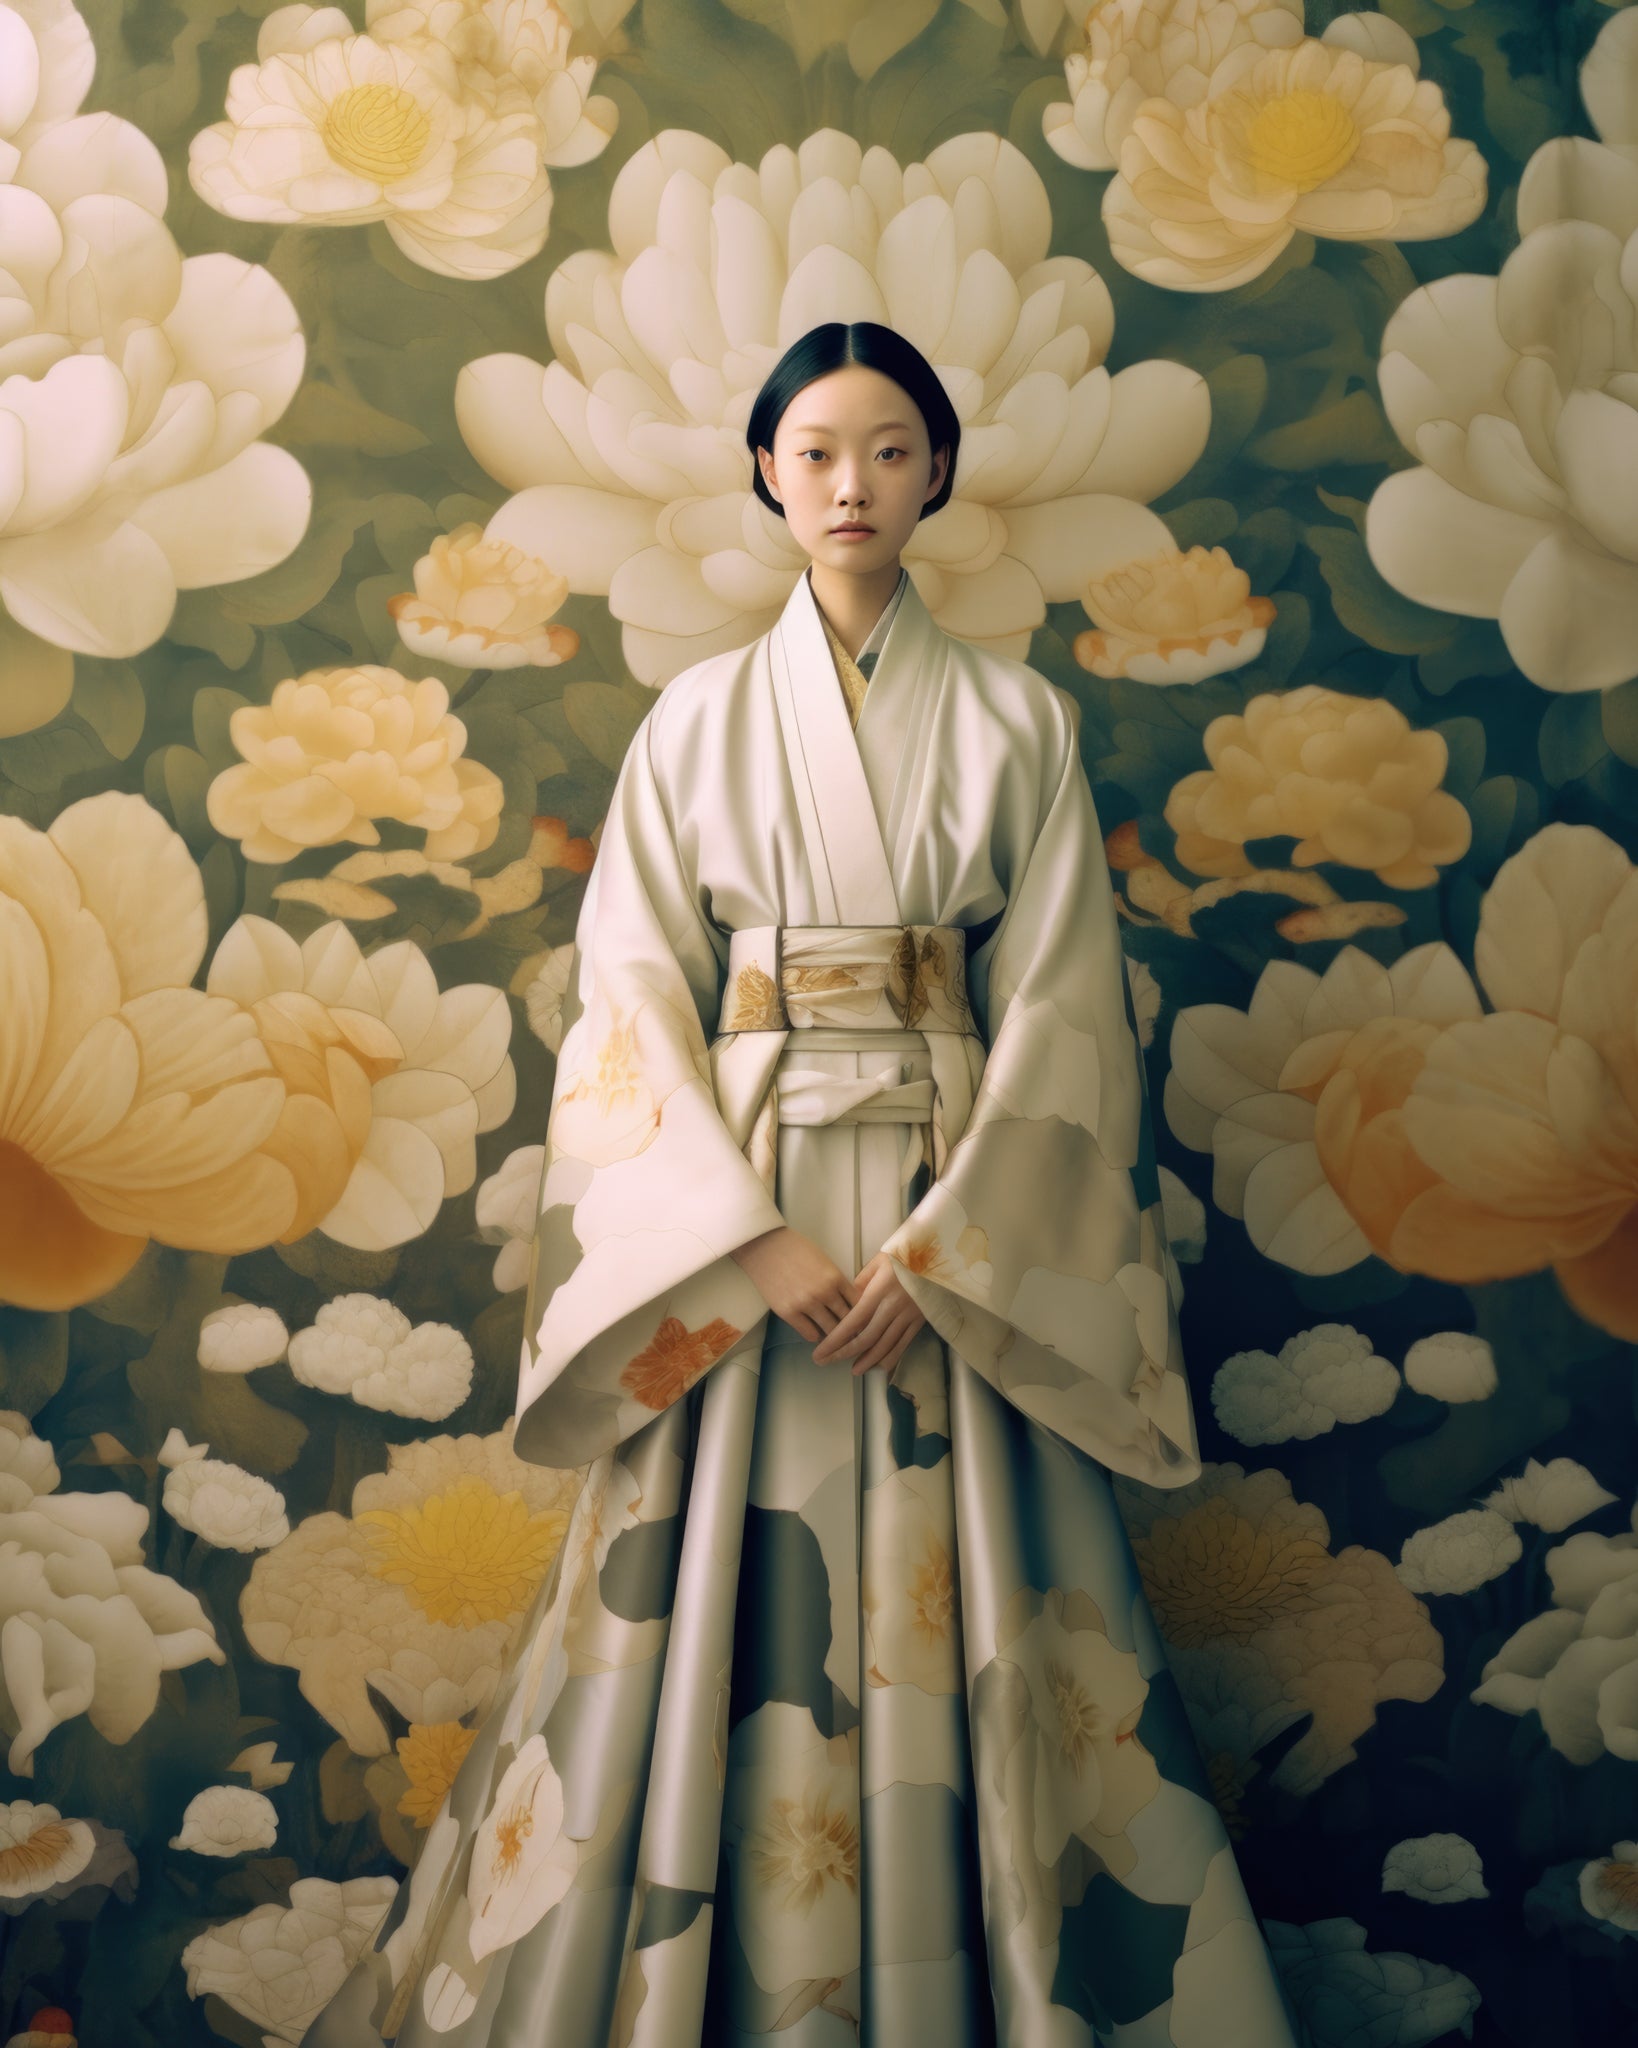 Art print showcasing a woman in a traditional kimono with delicate floral patterns, standing against a backdrop of soft, blooming flowers. This fine art print captures a timeless, elegant moment.